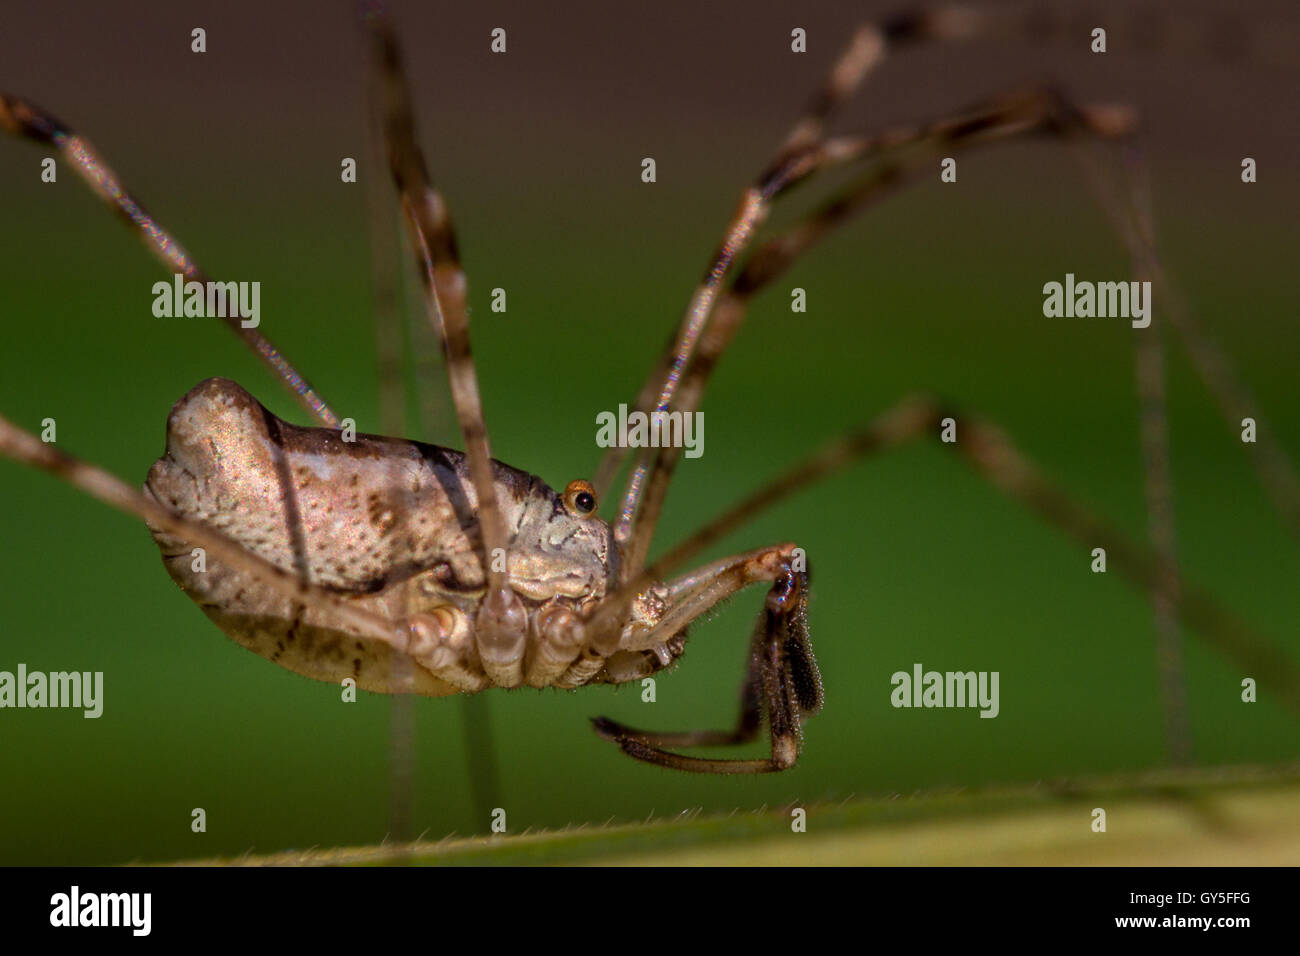 Close-up dramatic image of a harvestman (arachnid), commonly mistaken for a spider, Yorkshire, England Stock Photo